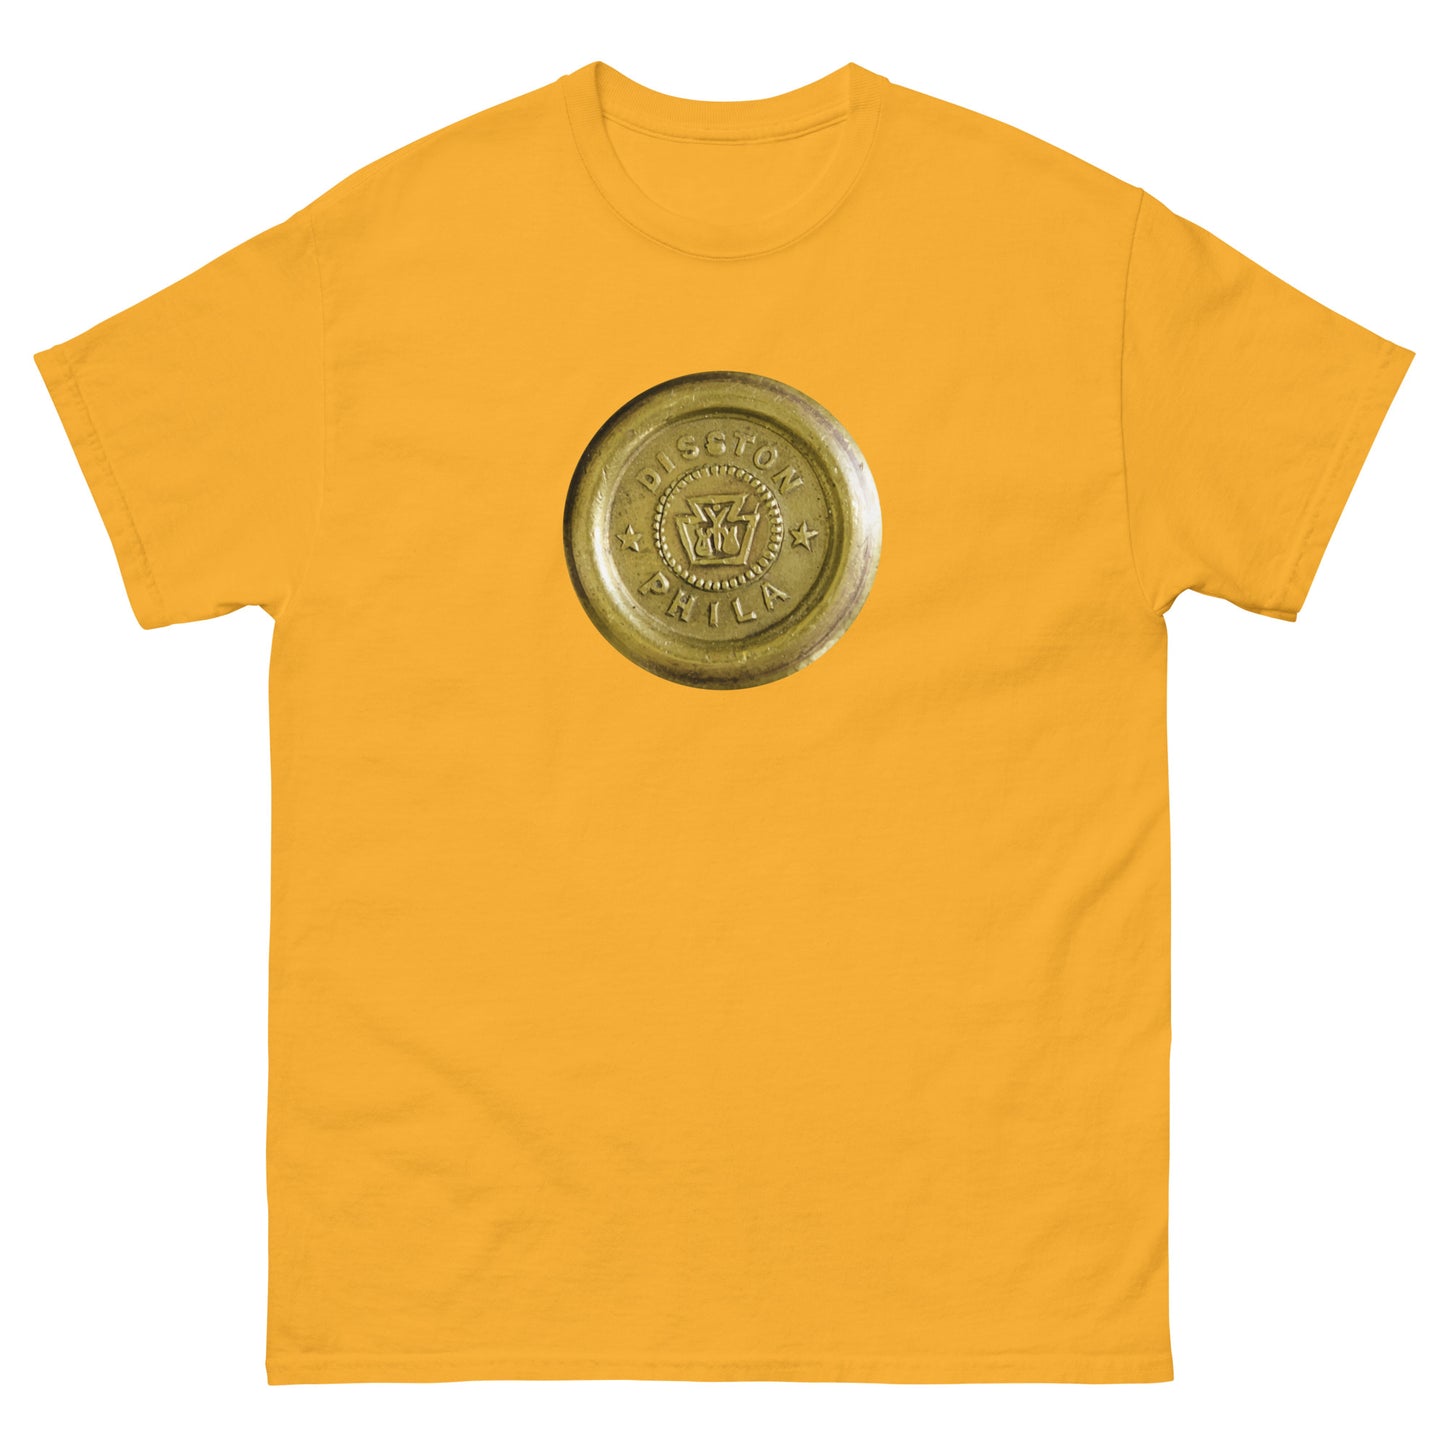 Disston Hand Saw Medallion Woodworking T-Shirt (Multiple Colors)